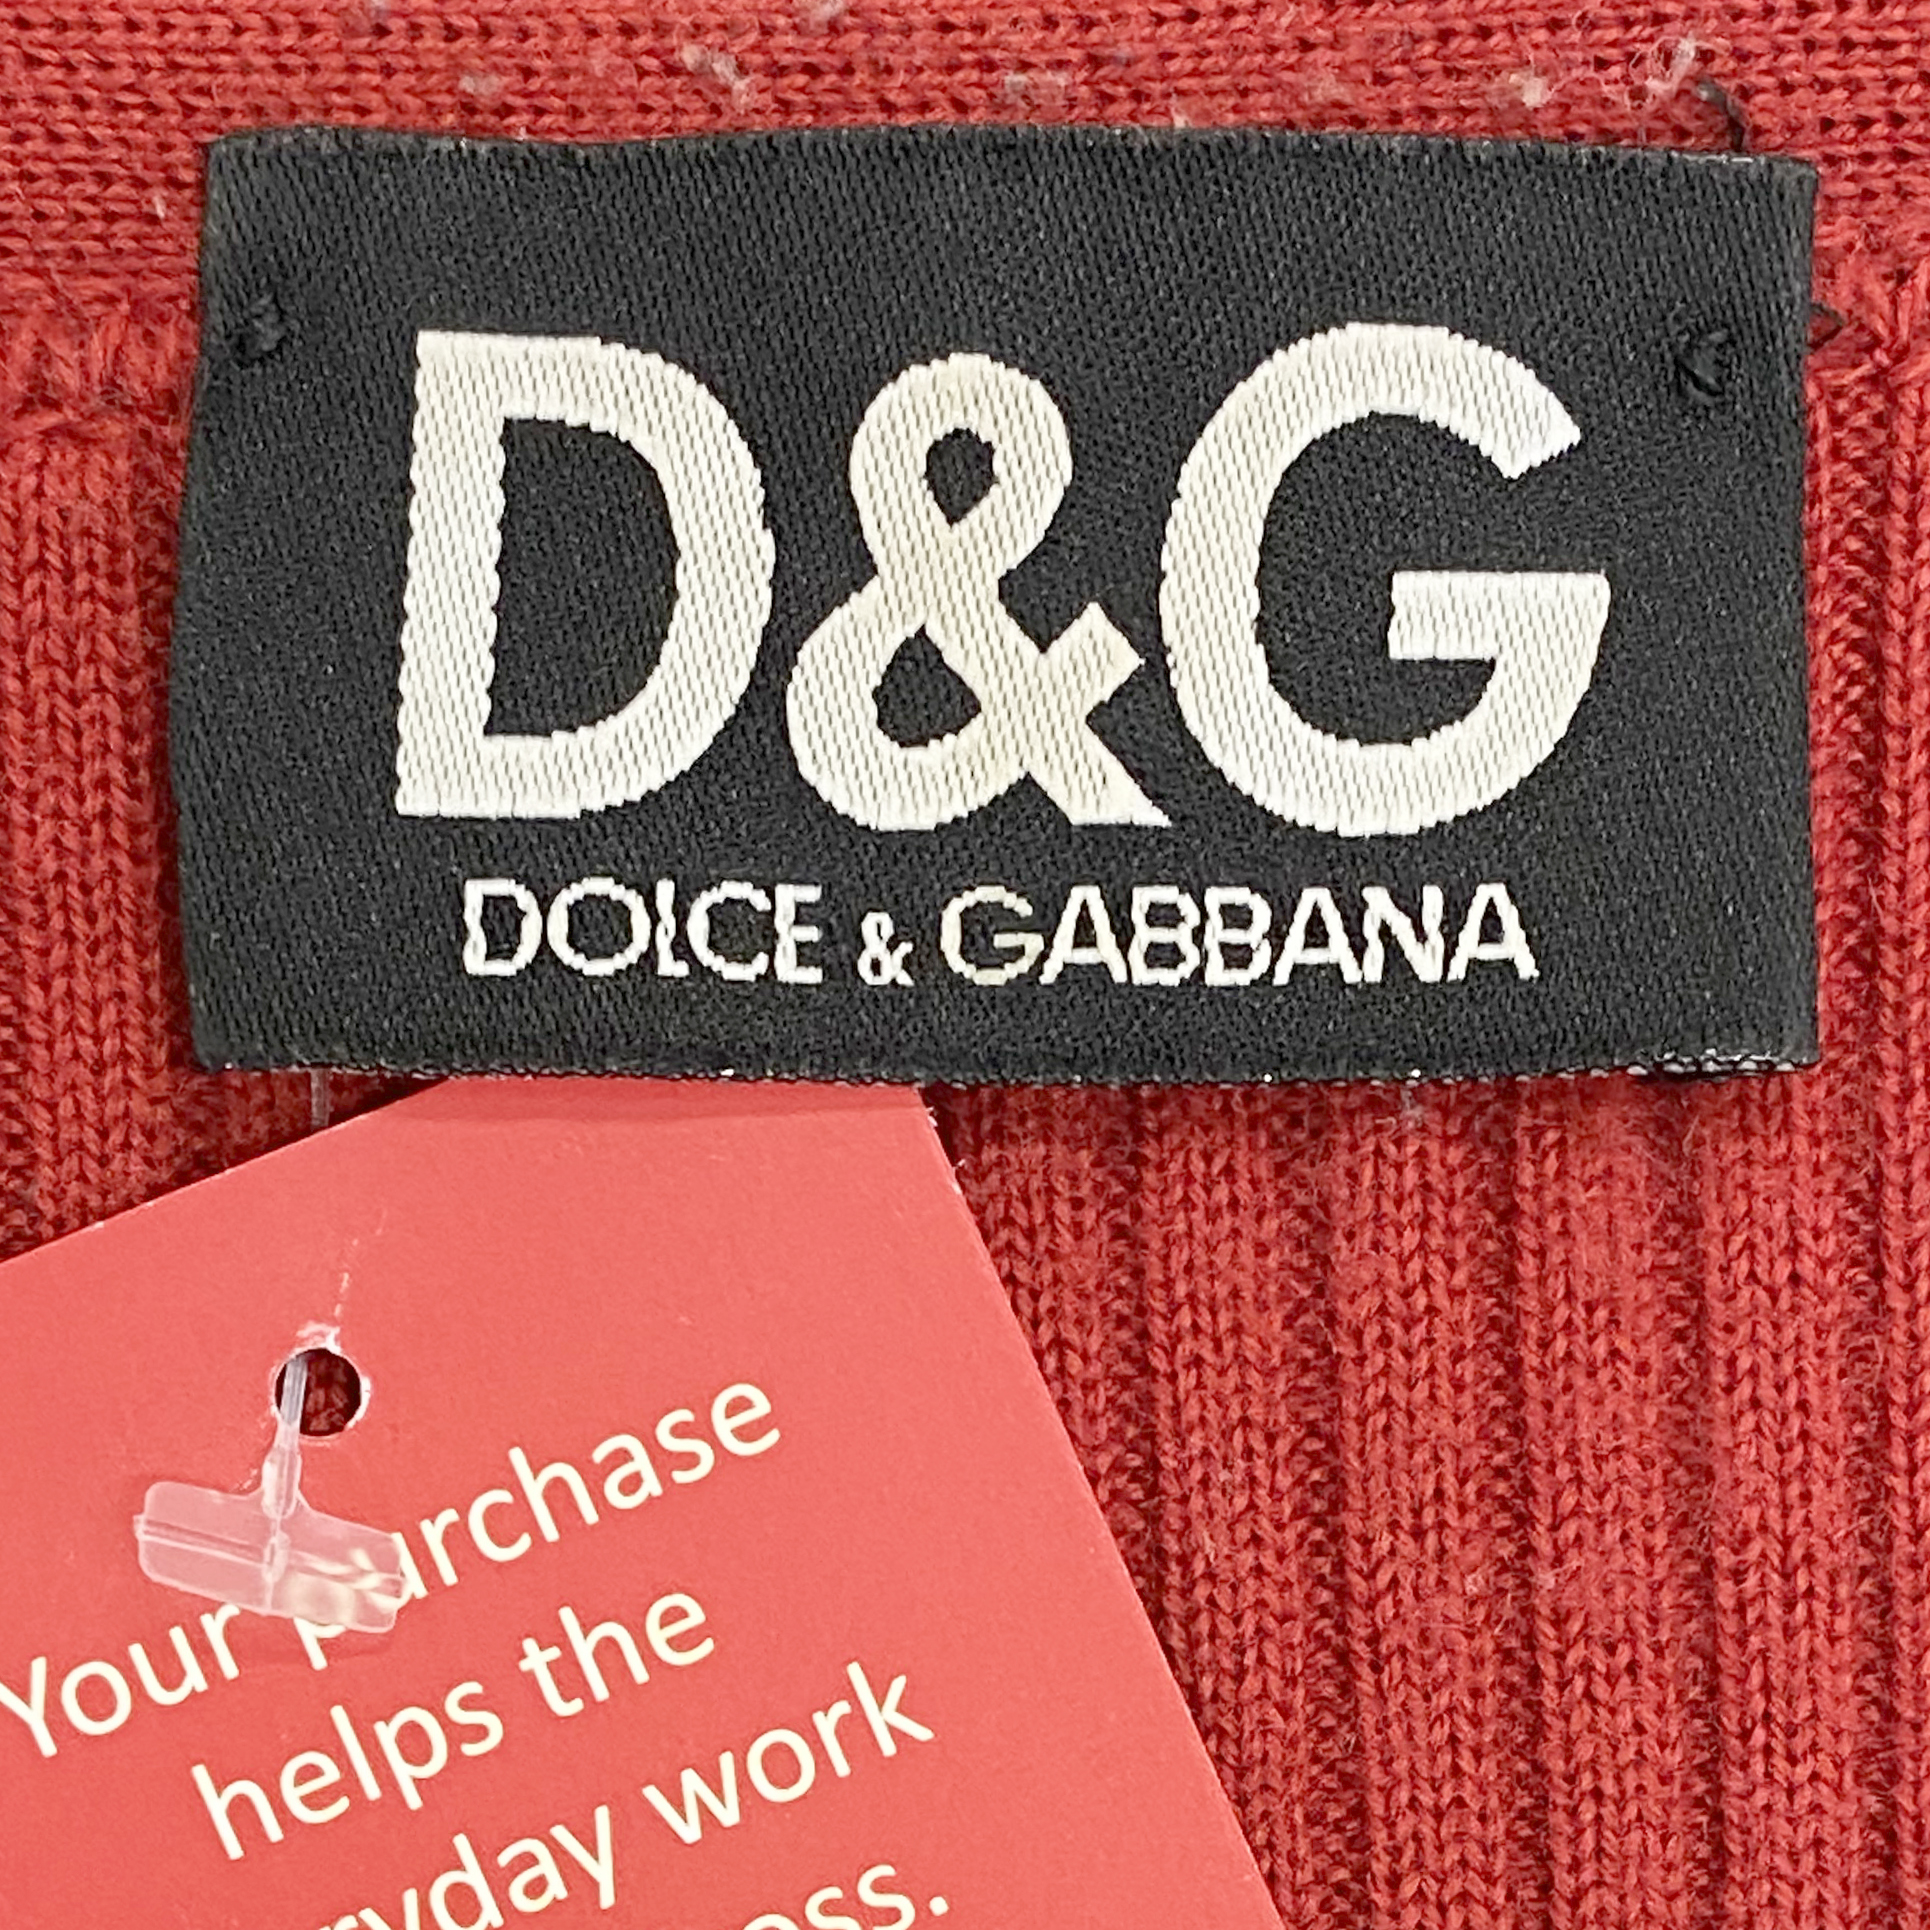 Dolce & Gabbana Red Knit Top